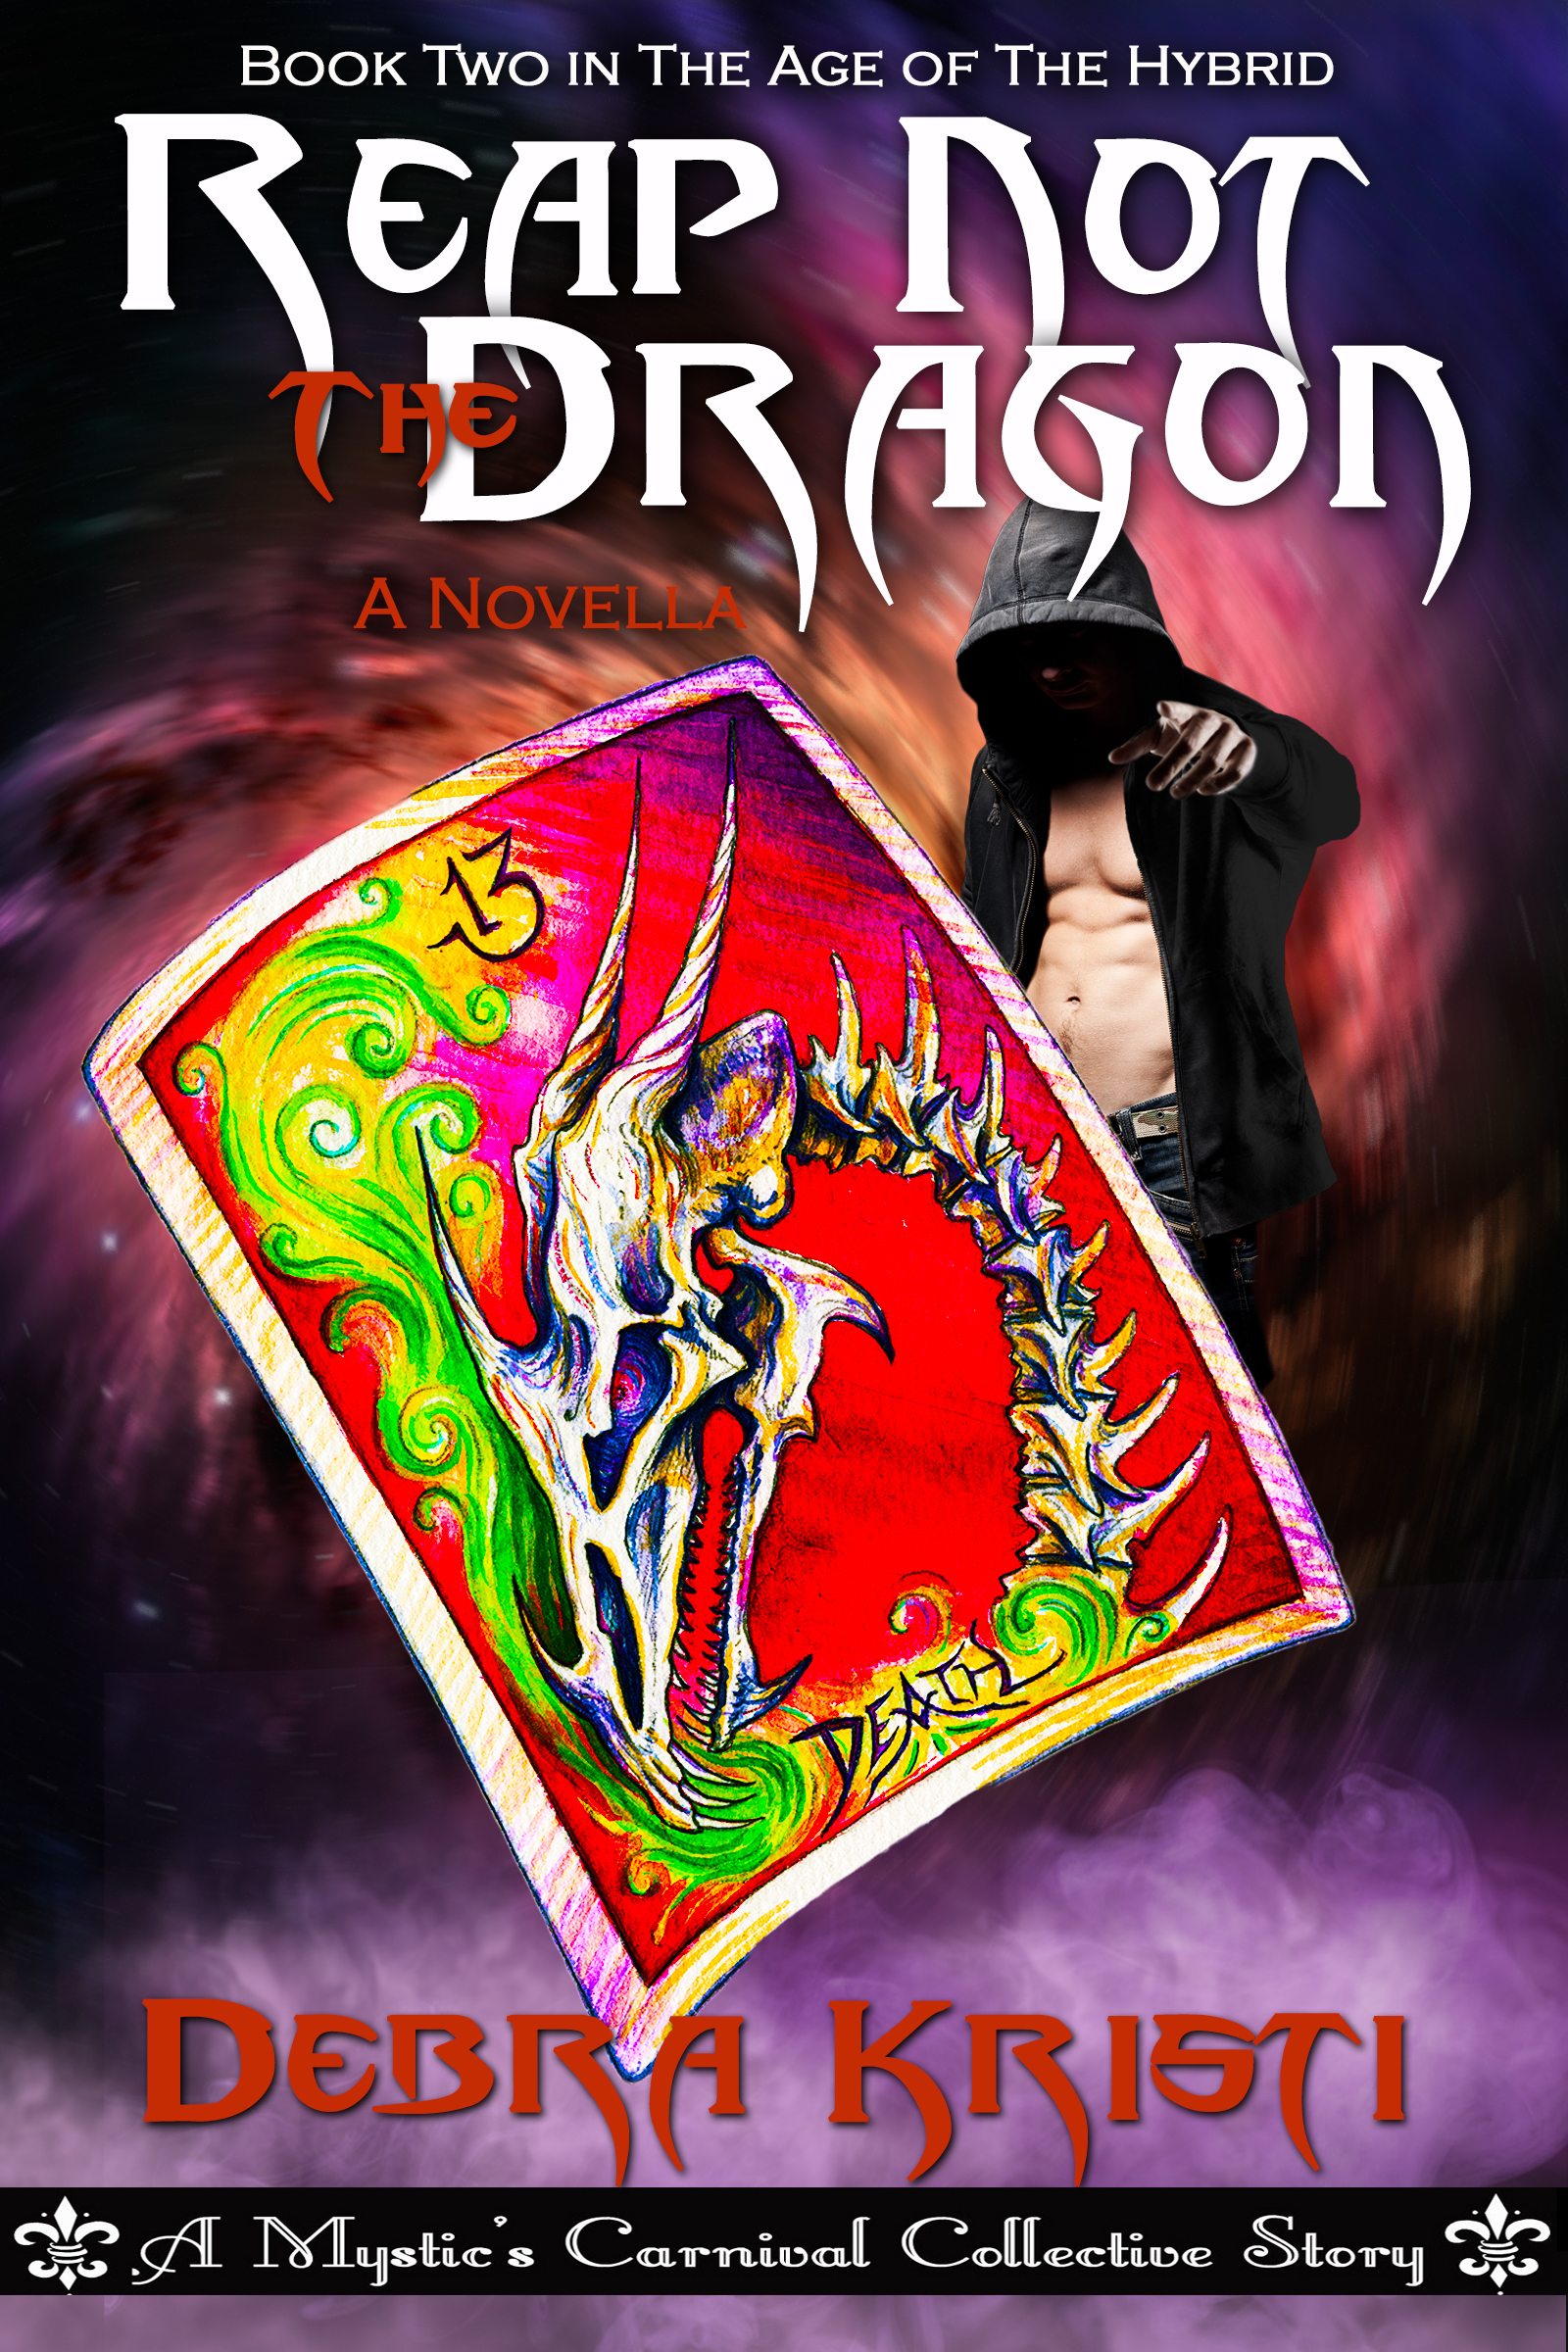 Reap Not the Dragon in Book Name and Cover Reveal by Ghost Girl Publishing